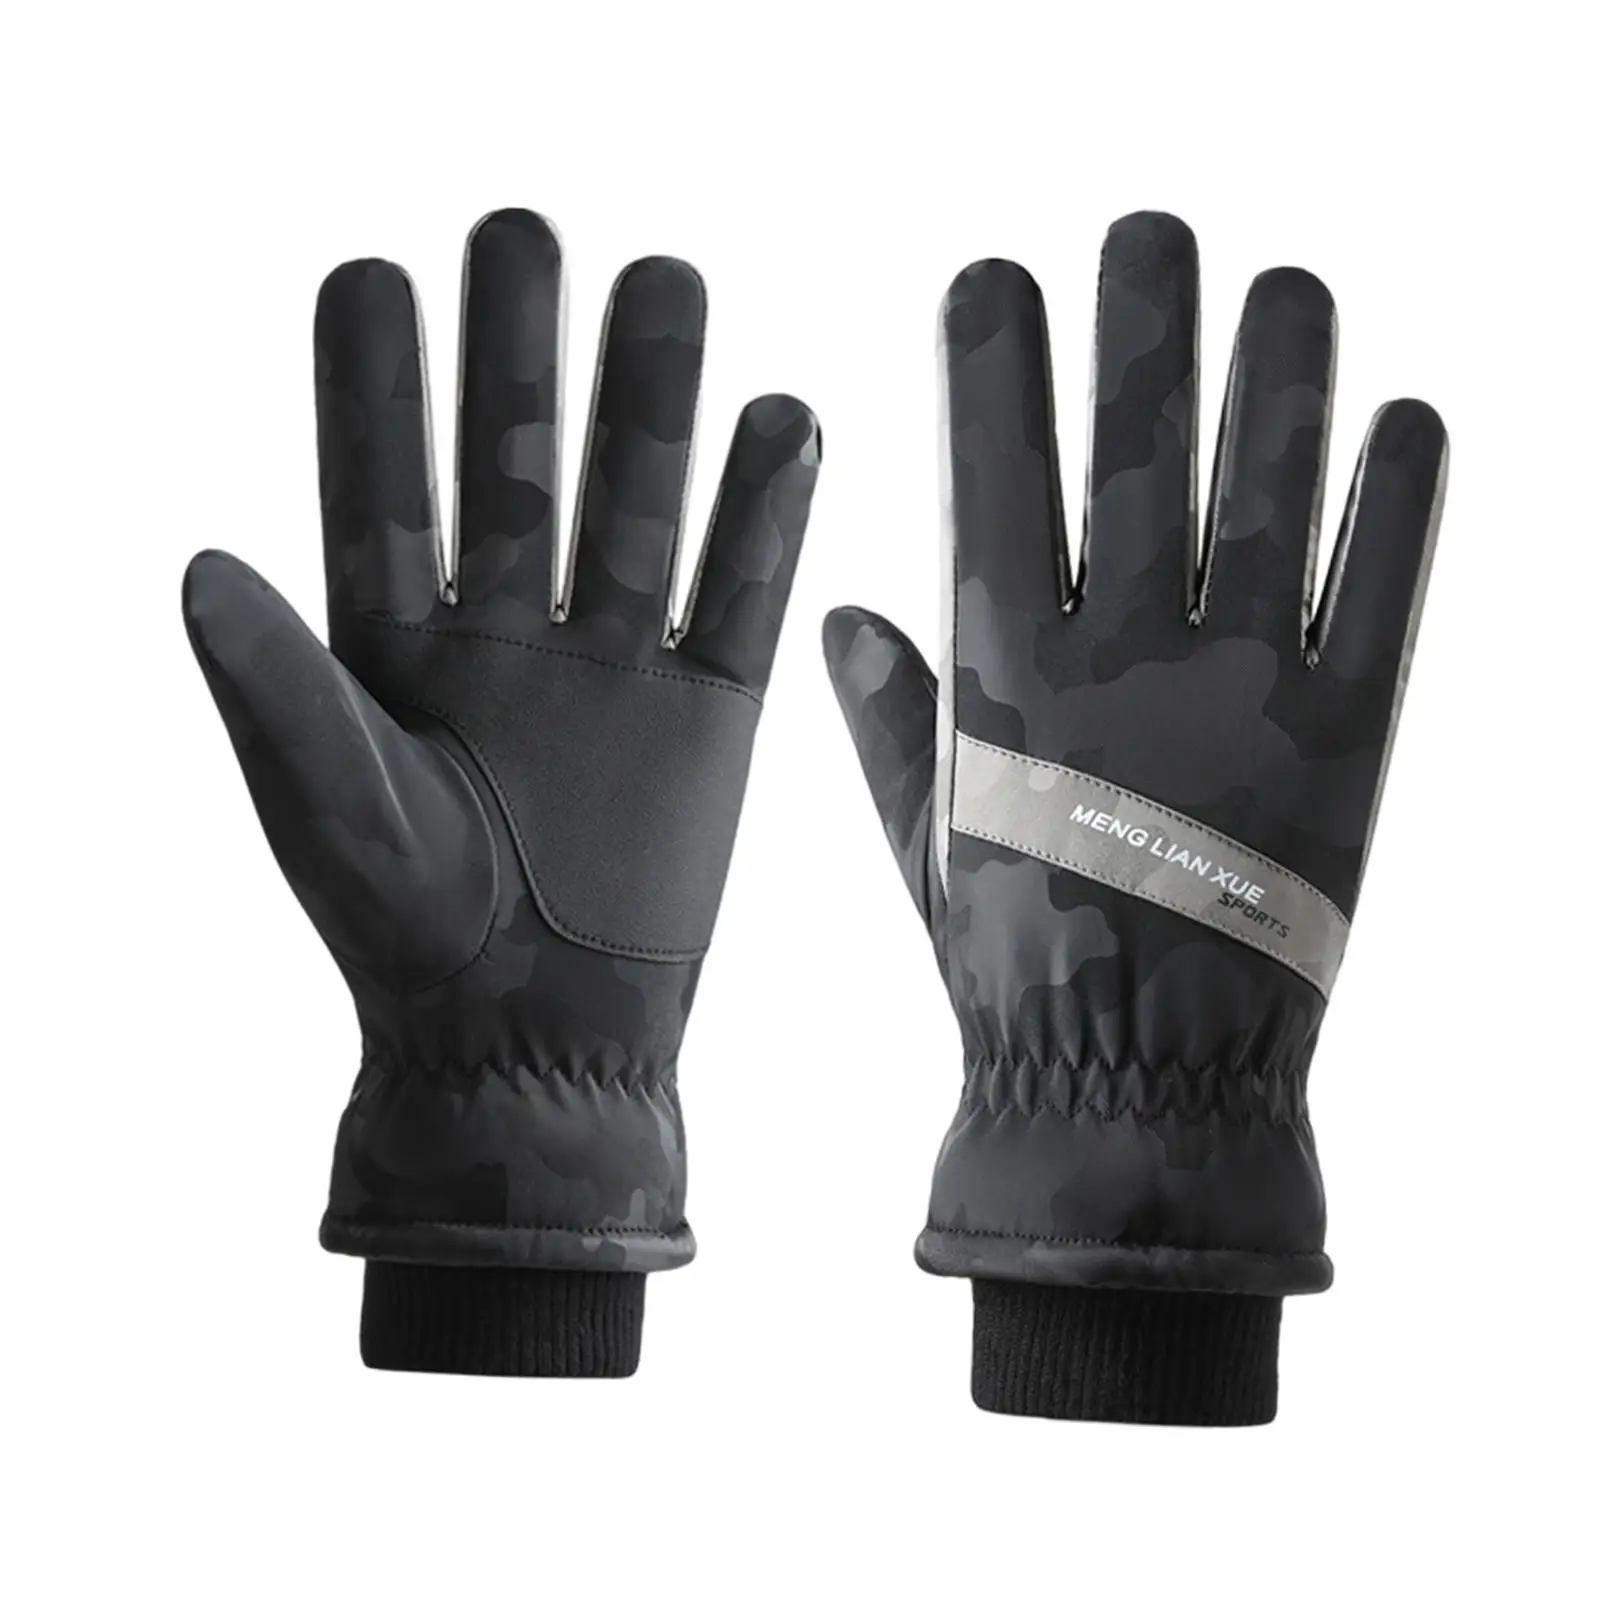 Winter Gloves Touch Screen Cycling Gloves for Running Skating Motorcycling